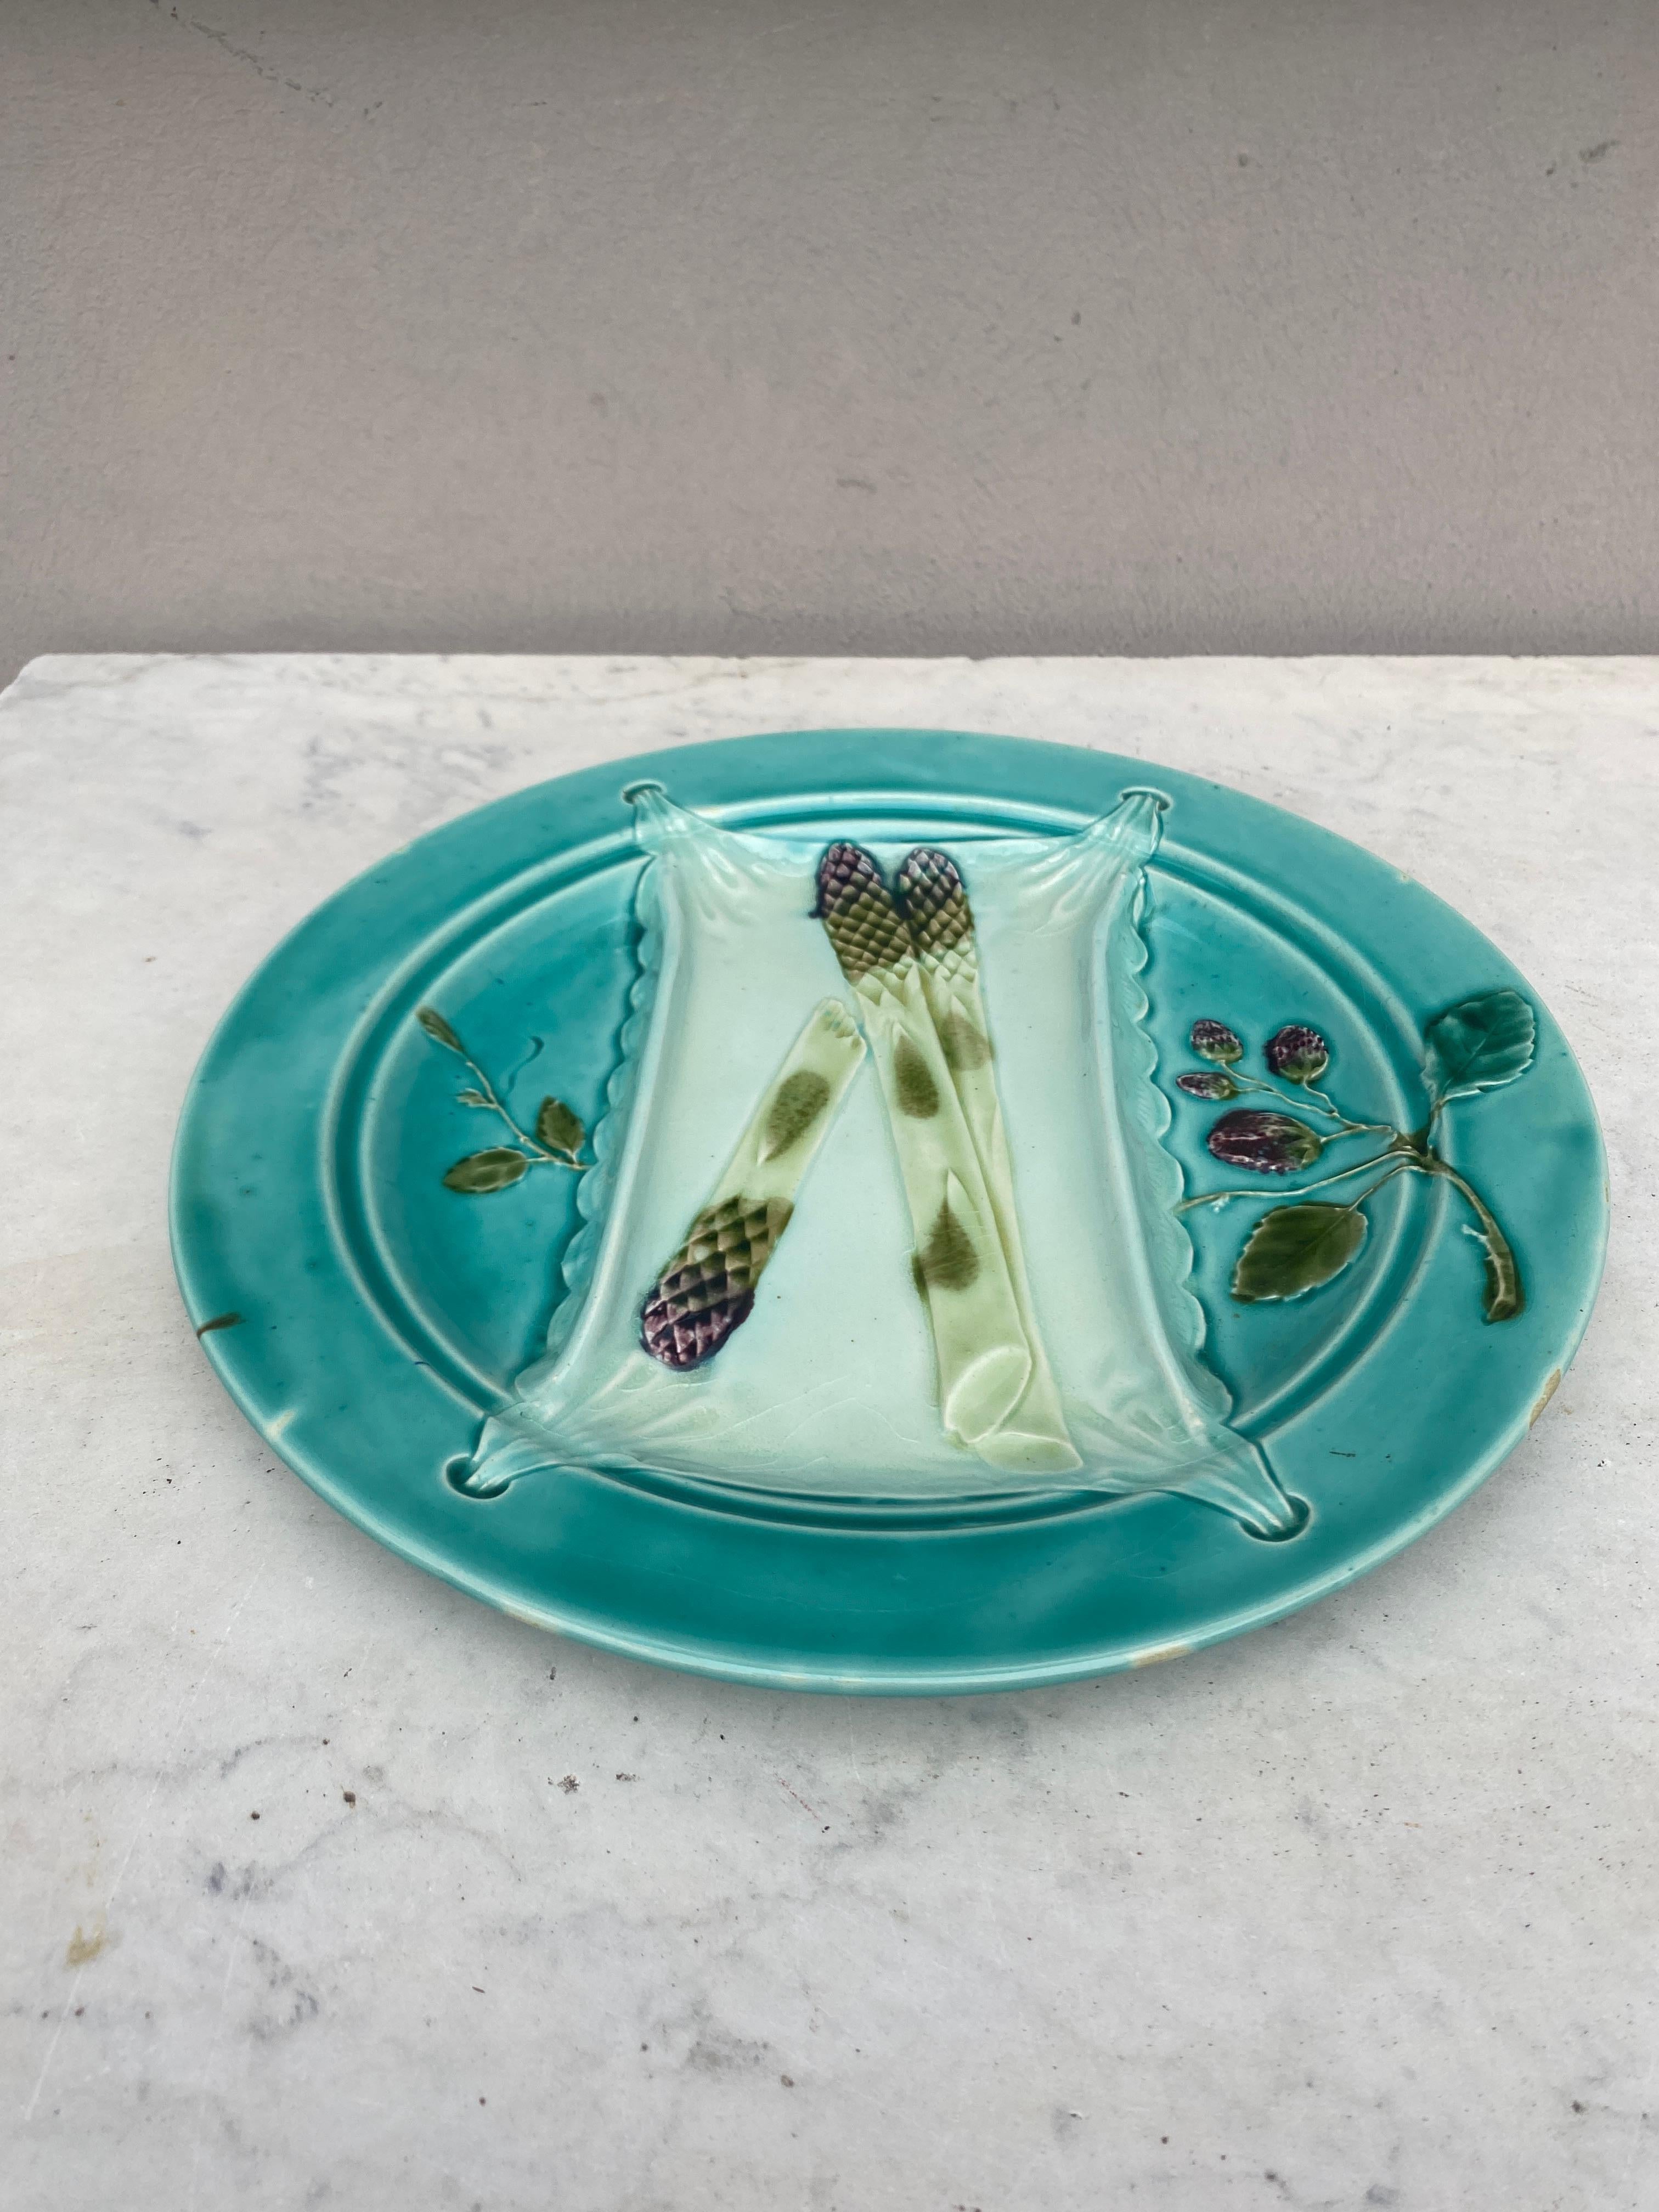 19th century rare Majolica turquoise asparagus plate, Luneville unsigned.
Every important French manufactures produced at the end of the 19th century asparagus and artichoke sets.
Reference / Page 16 